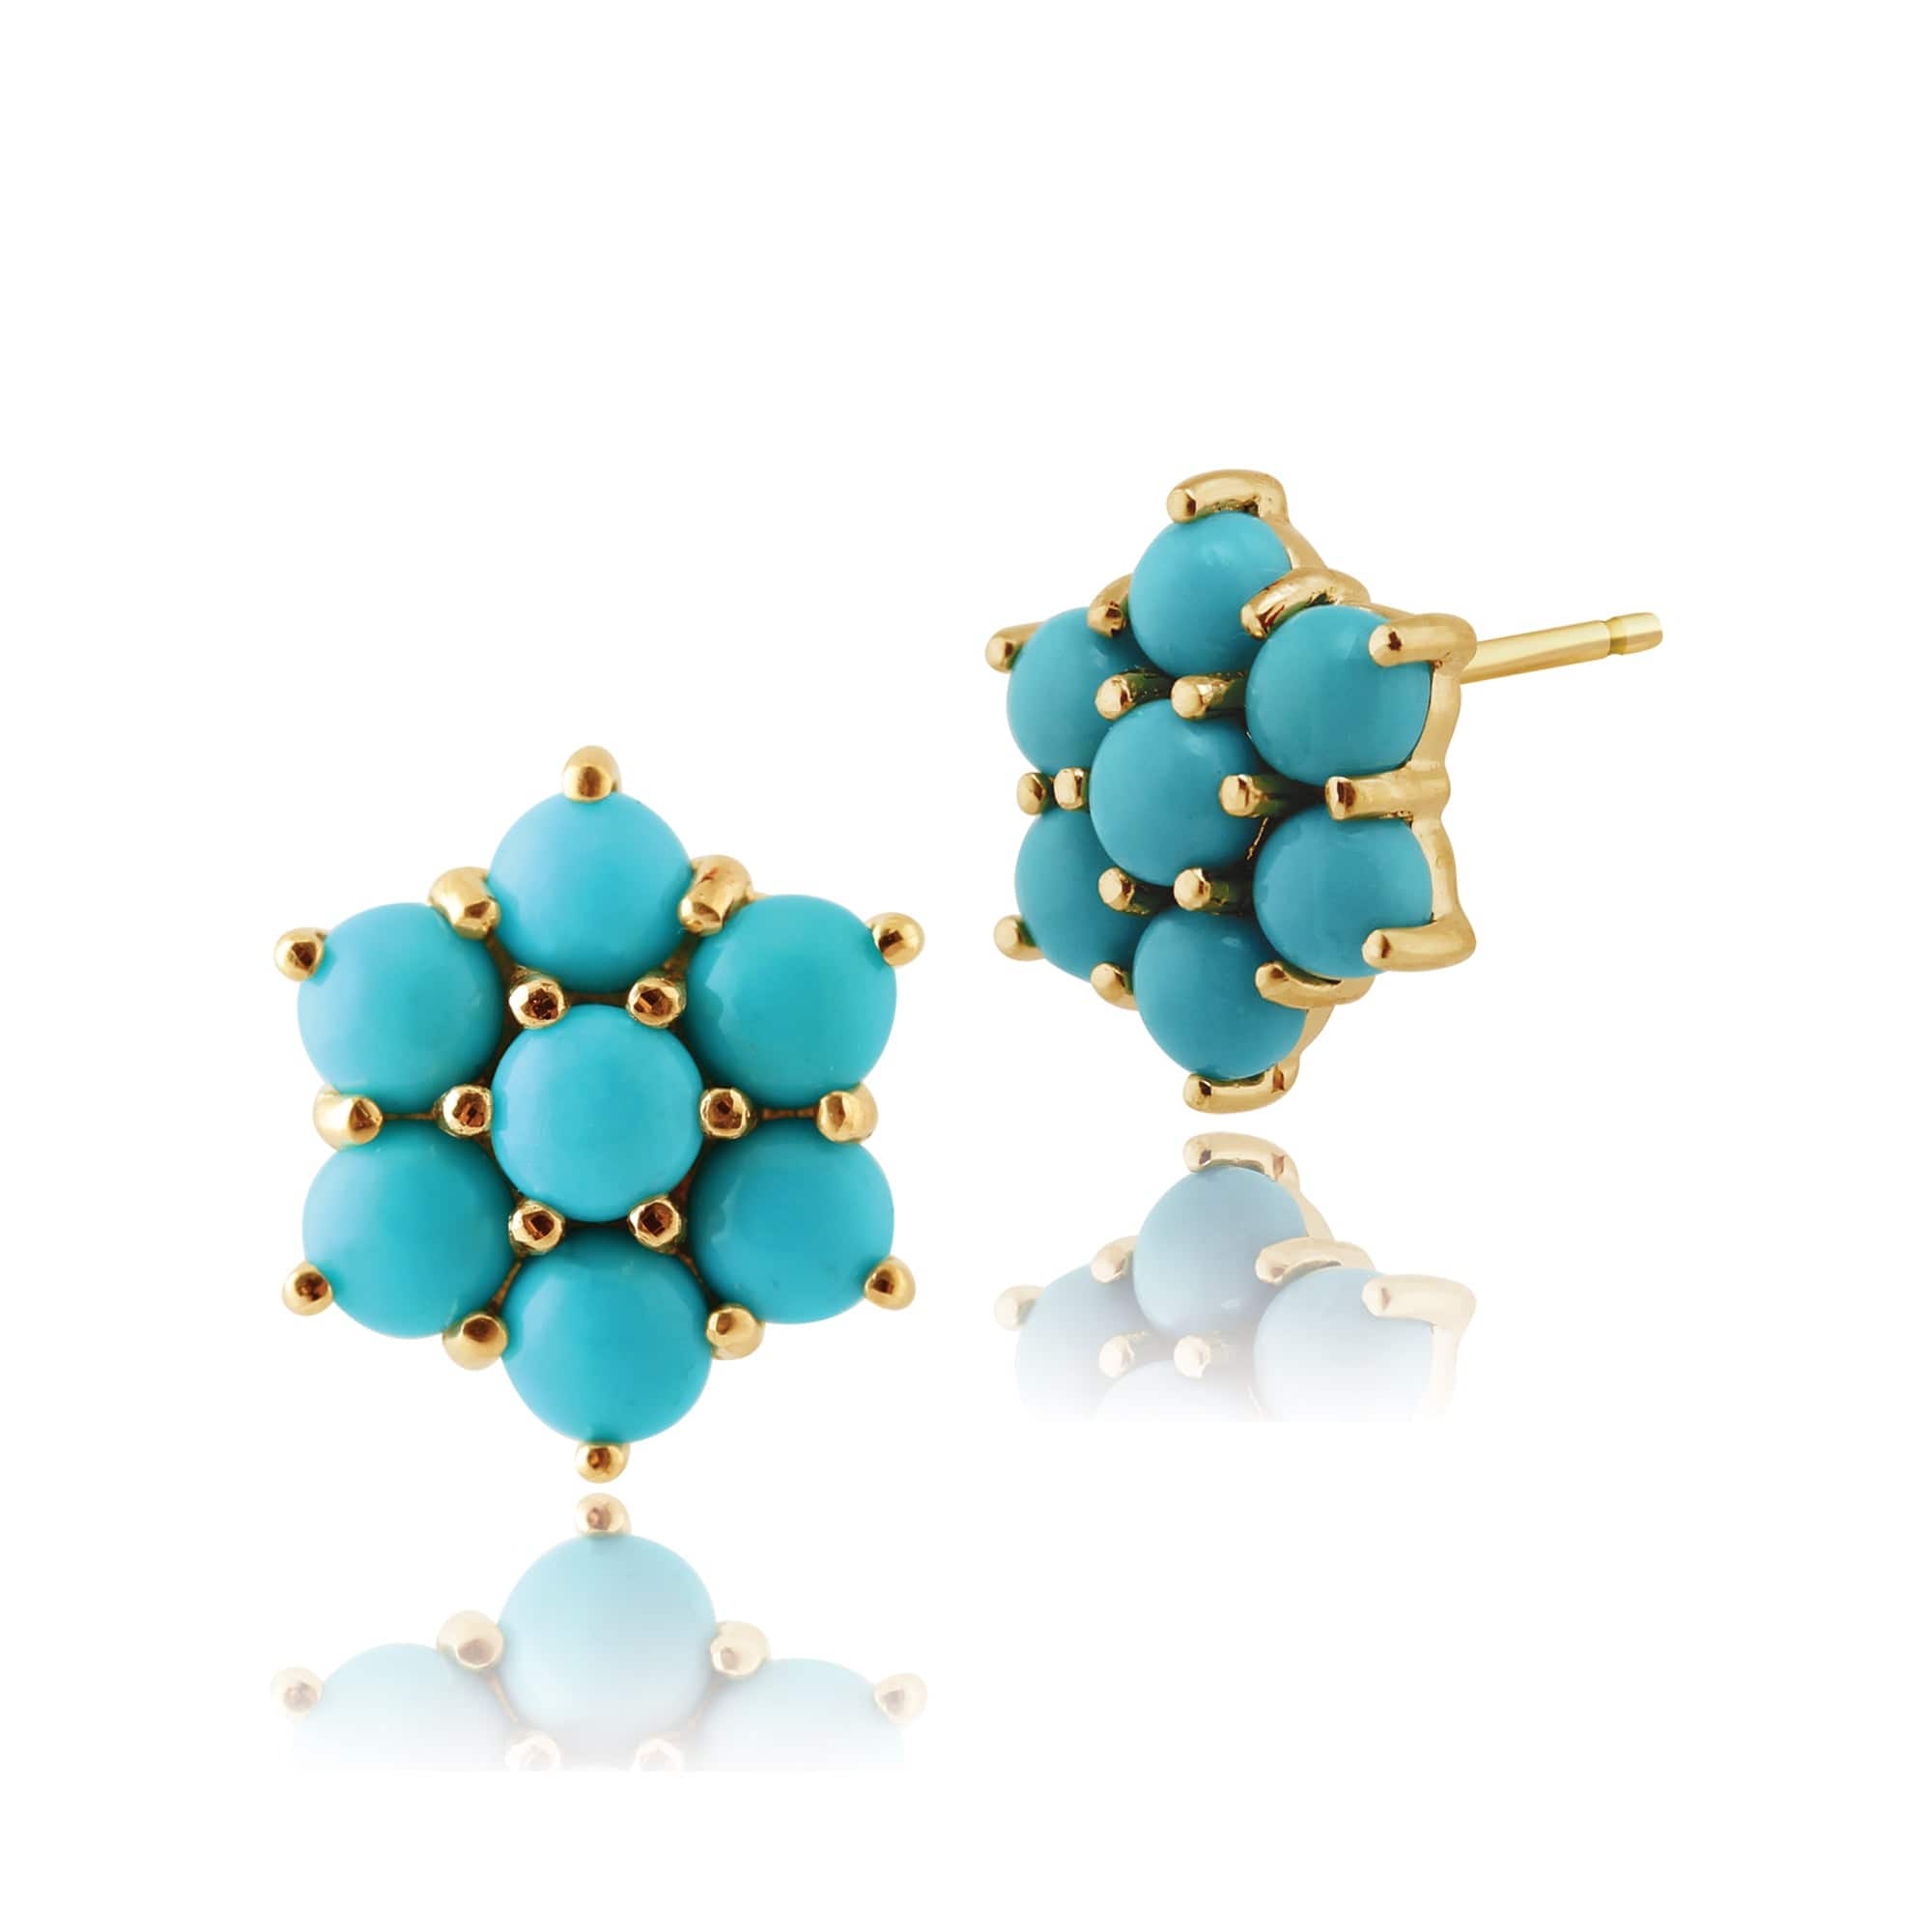 Floral Turquoise Cabochon Cluster Stud Earrings in 9ct Yellow Gold